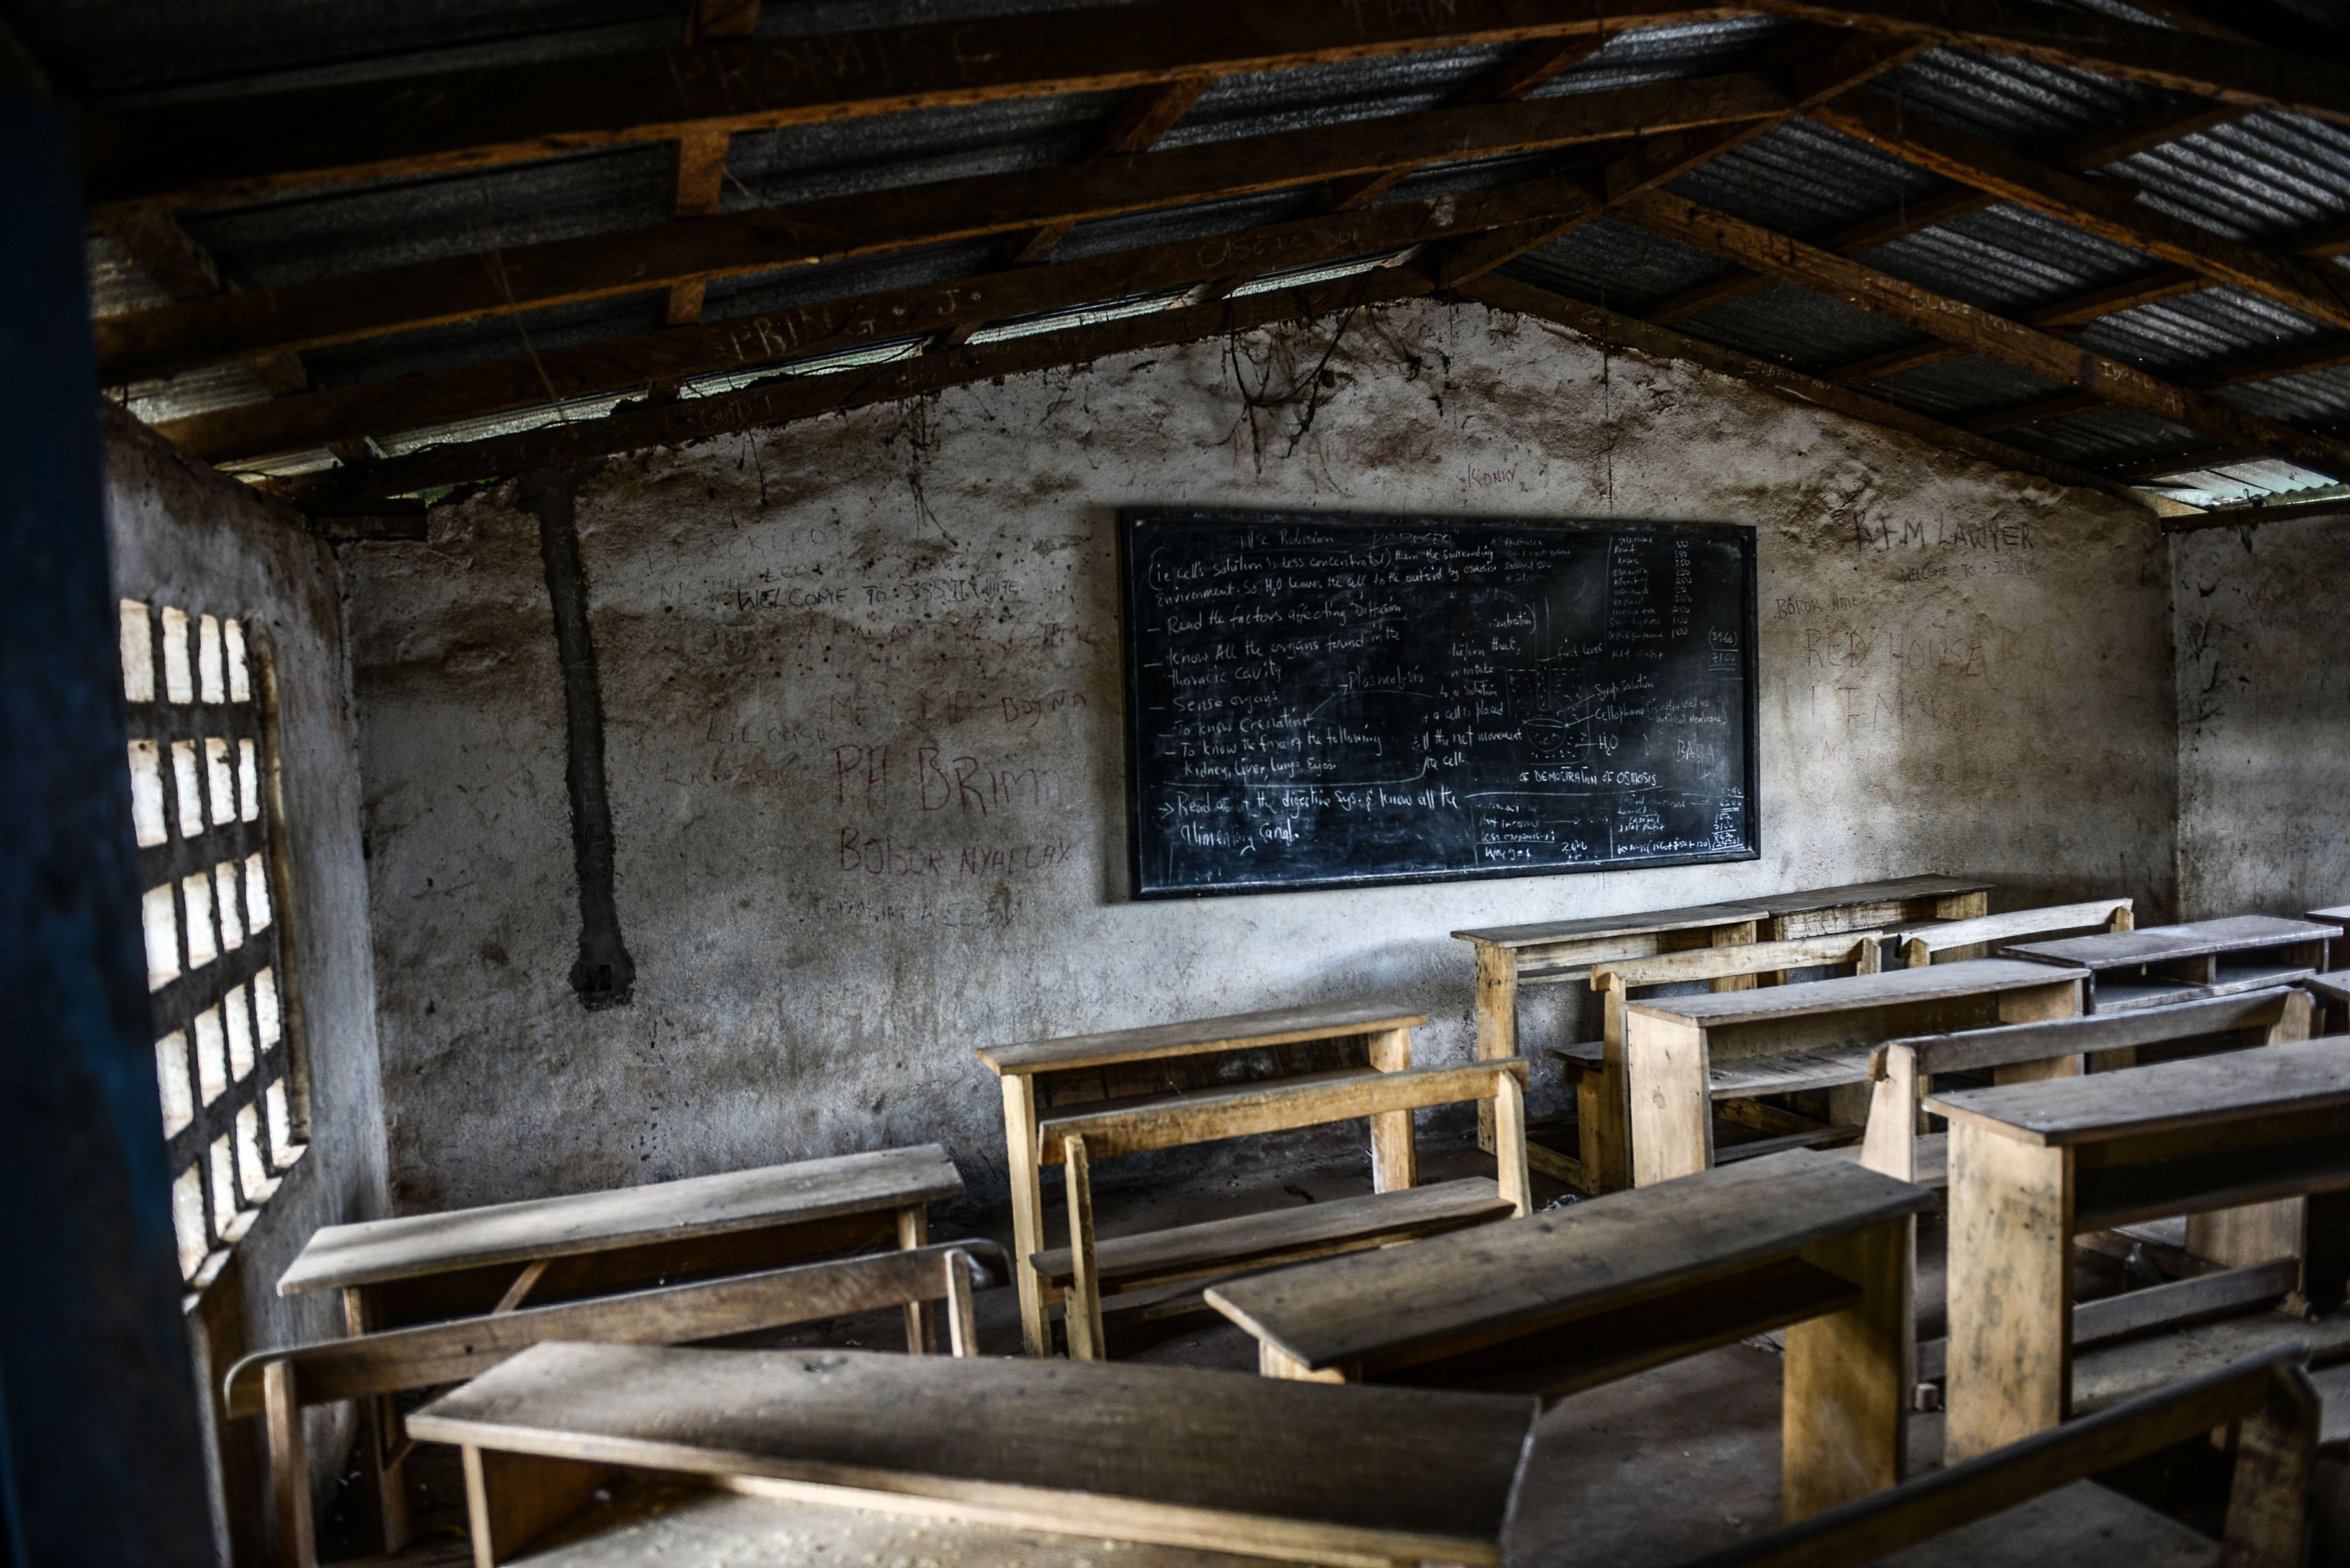 A classroom of a school stands abandoned on Aug. 25, 2014 in Kenema, Sierra Leone. Schools closed and villages quarantined after dozens of its congregation died with Ebola symptoms. (Mohammed Elshamy—Anadolu Agency/Getty Images)